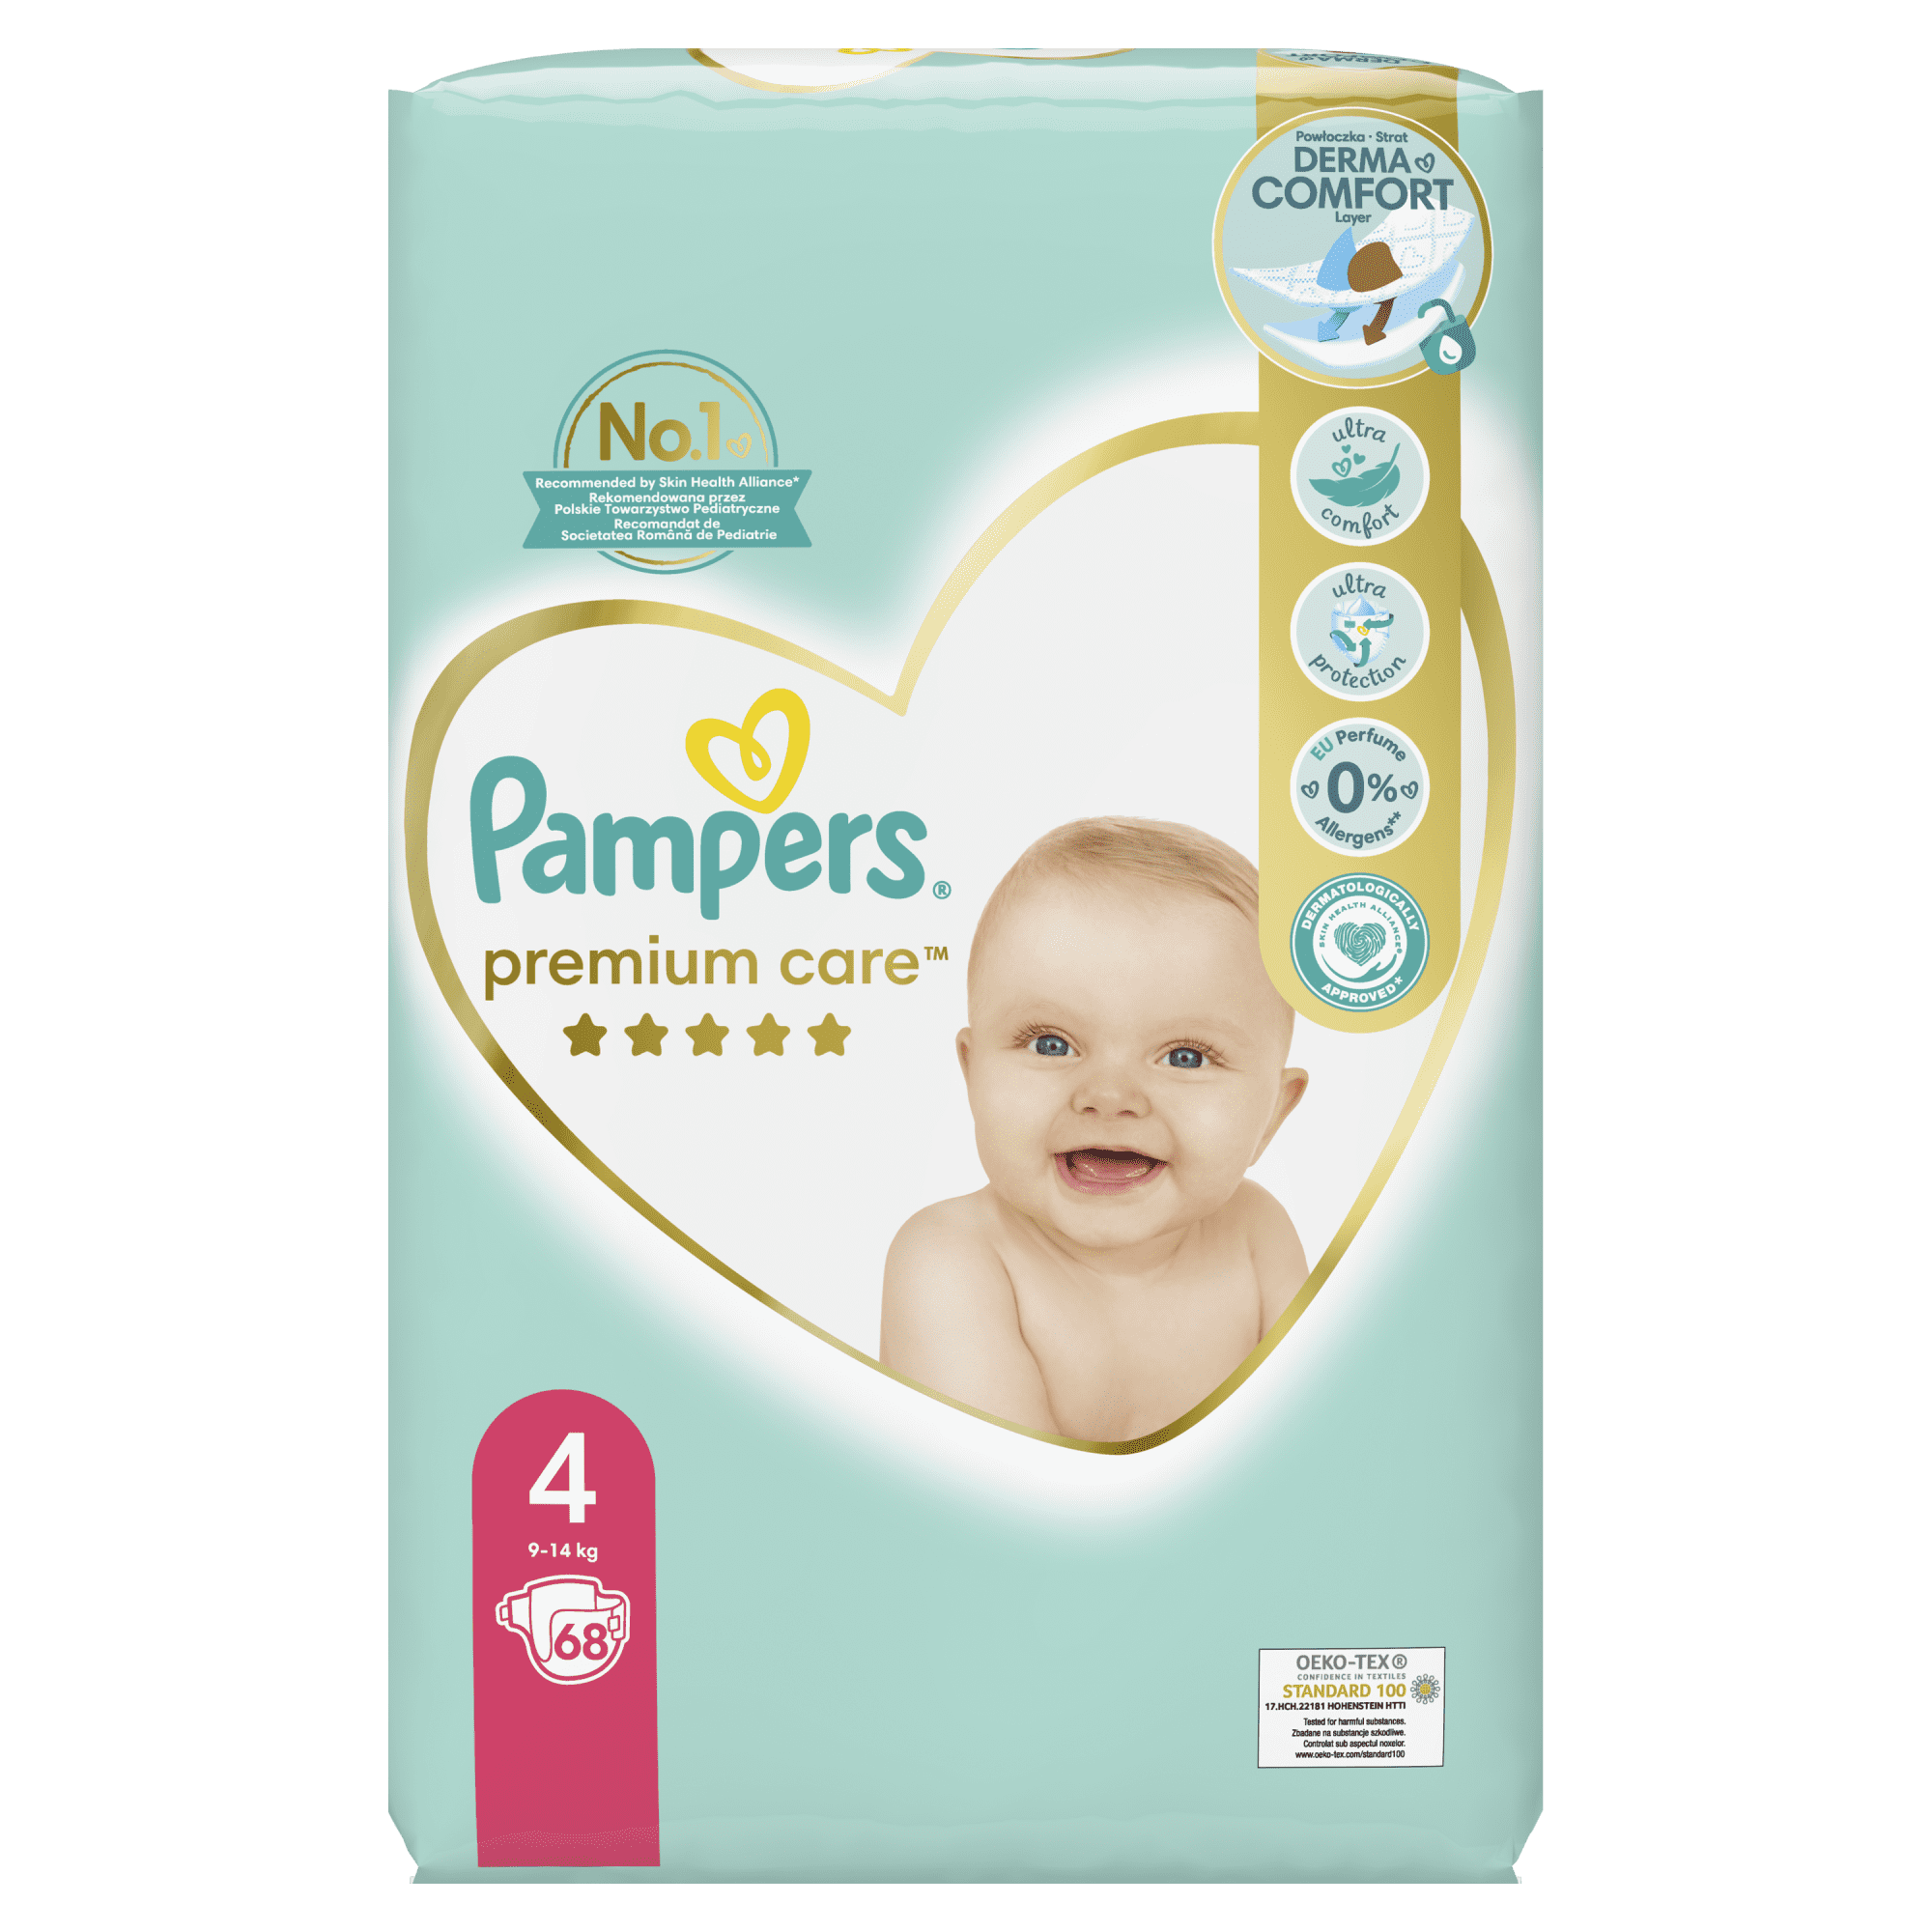 canon pixma g3000 pampers